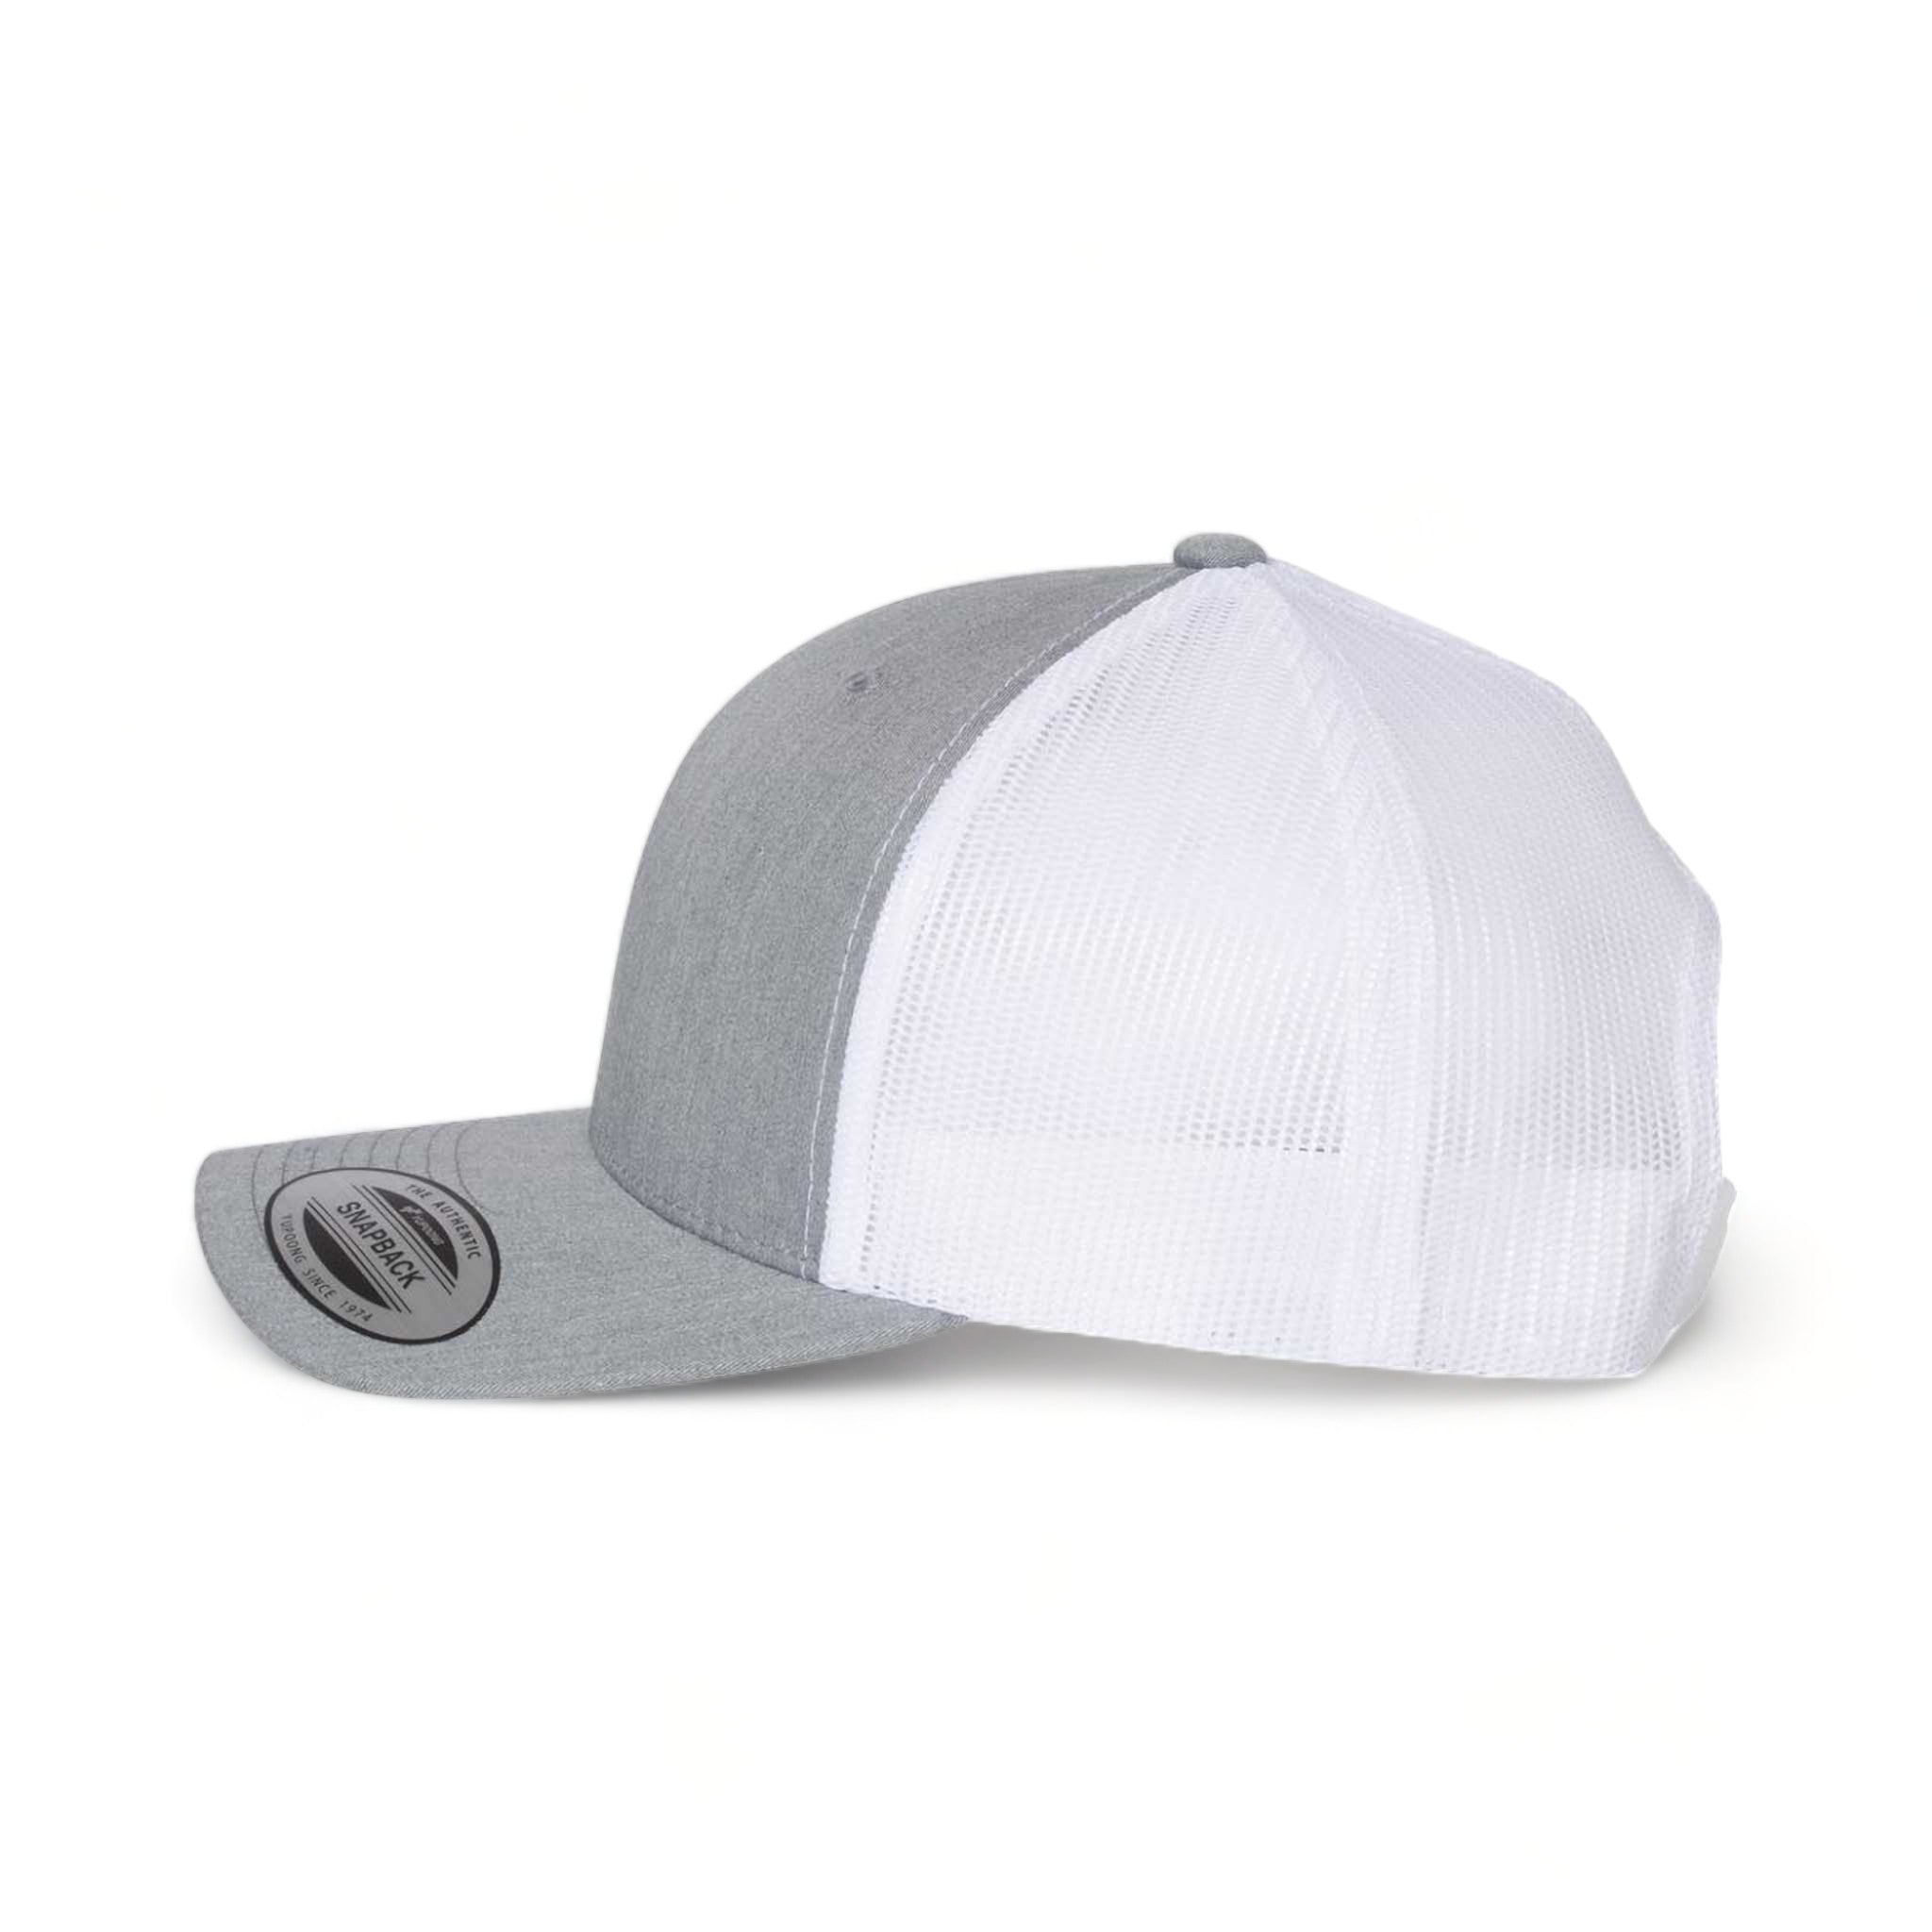 Side view of YP Classics 6606 custom hat in heather grey and white